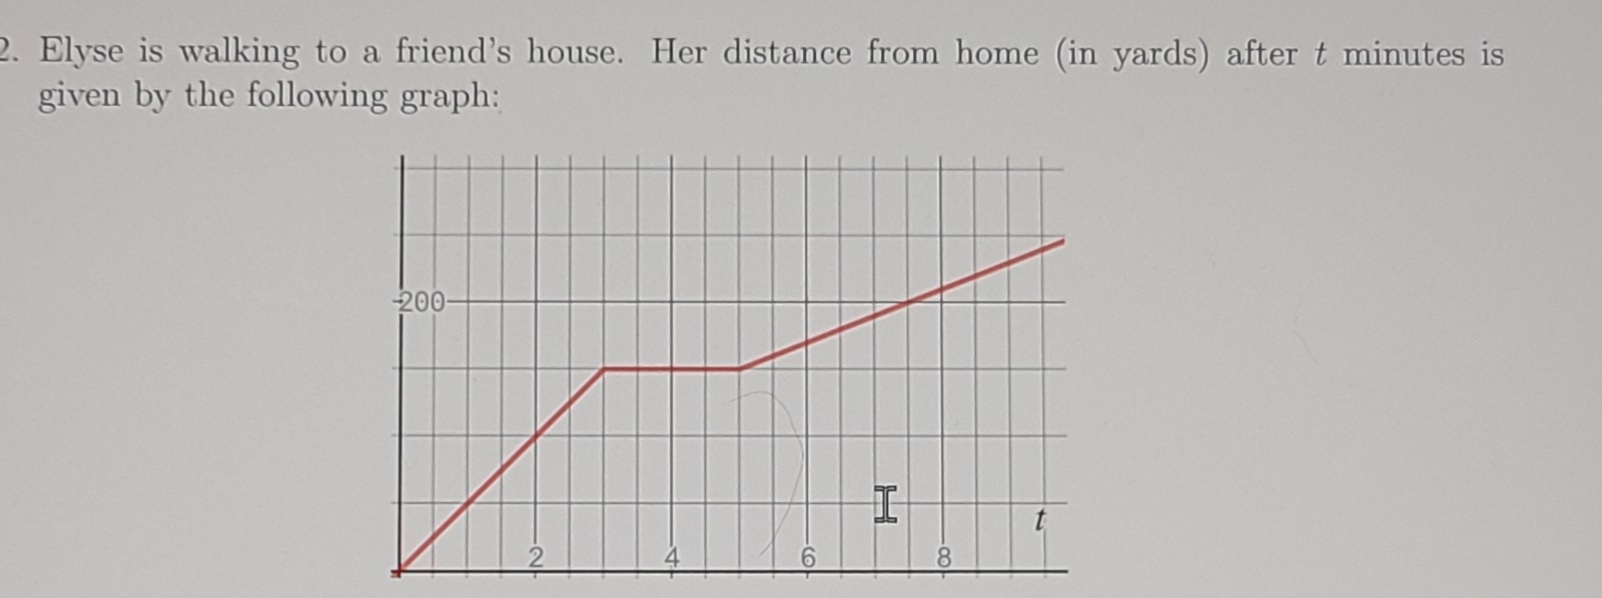 Elyse is walking to a friend's house. Her distance from home (in yards) after t minutes is
given by the following graph:
200-
8.
